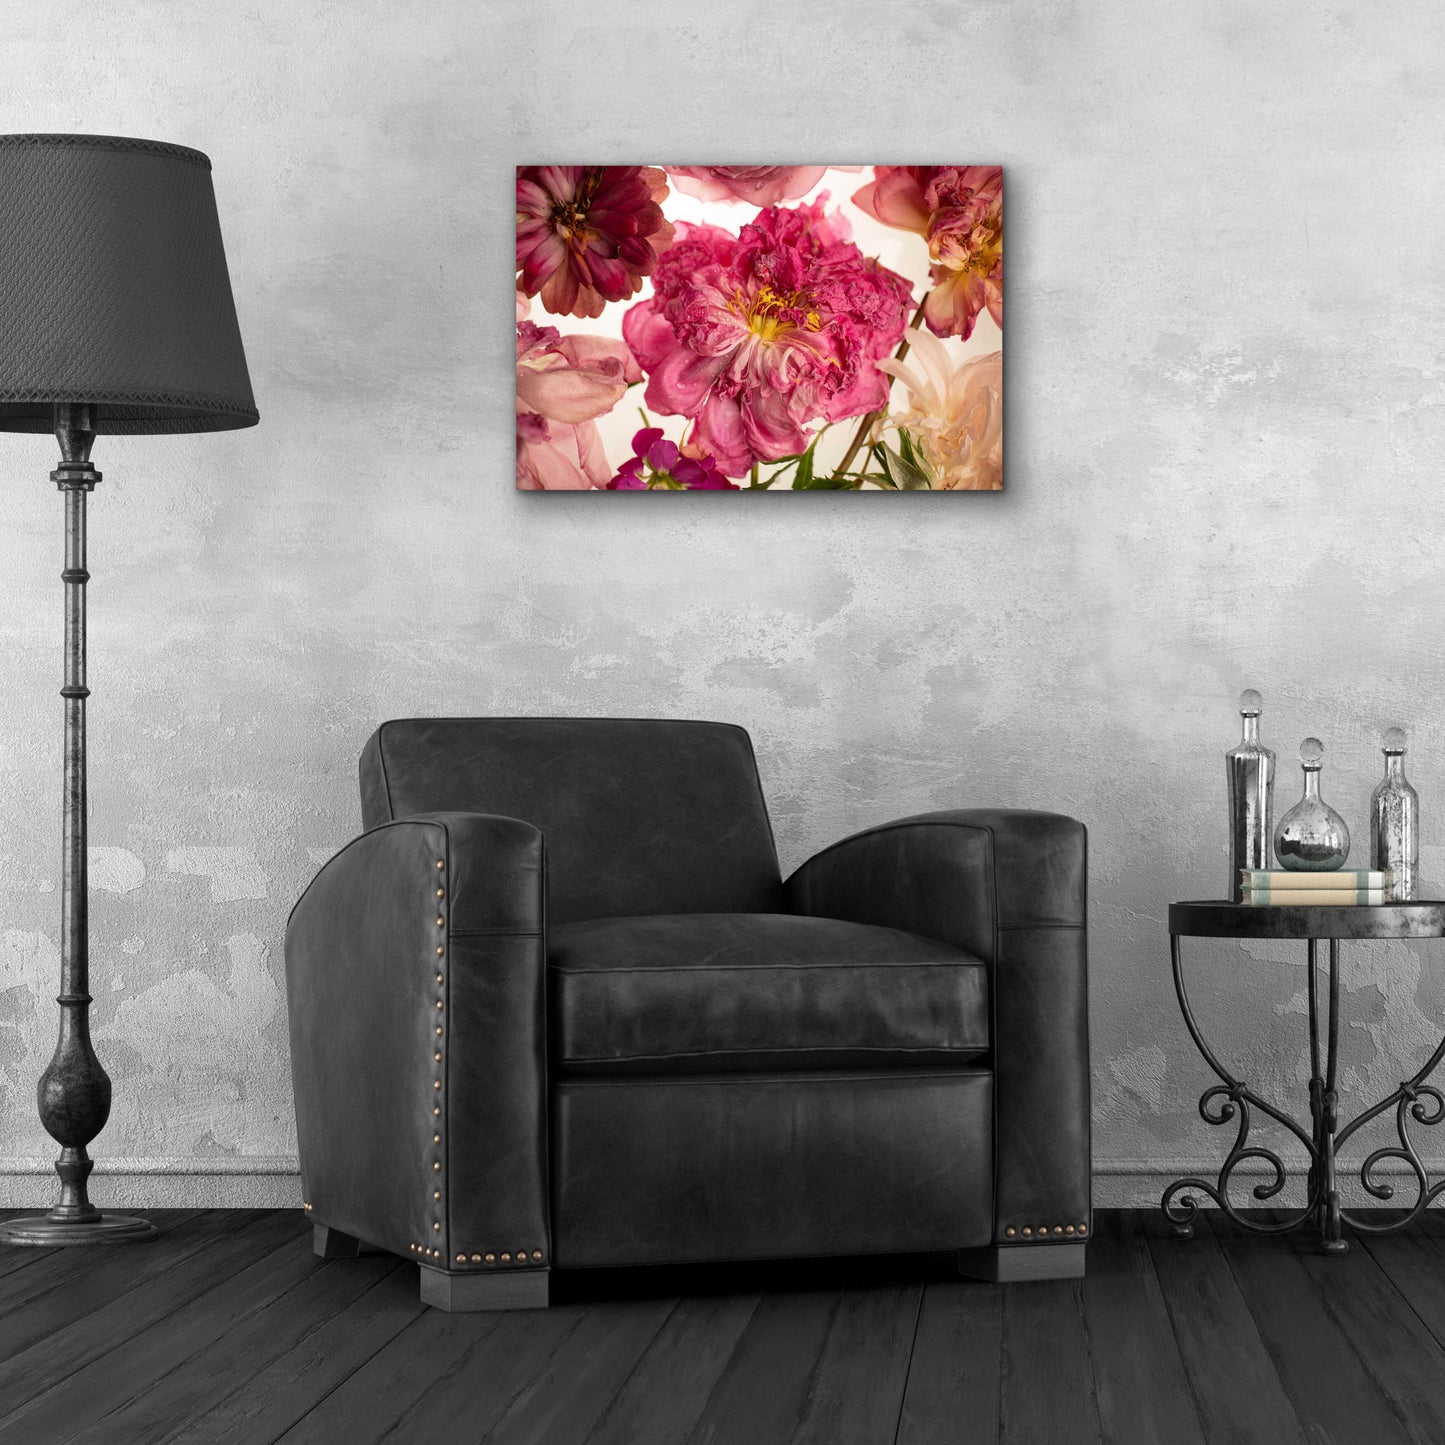 Epic Art 'Peony on White' by Leah McLean, Acrylic Glass Wall Art,24x16